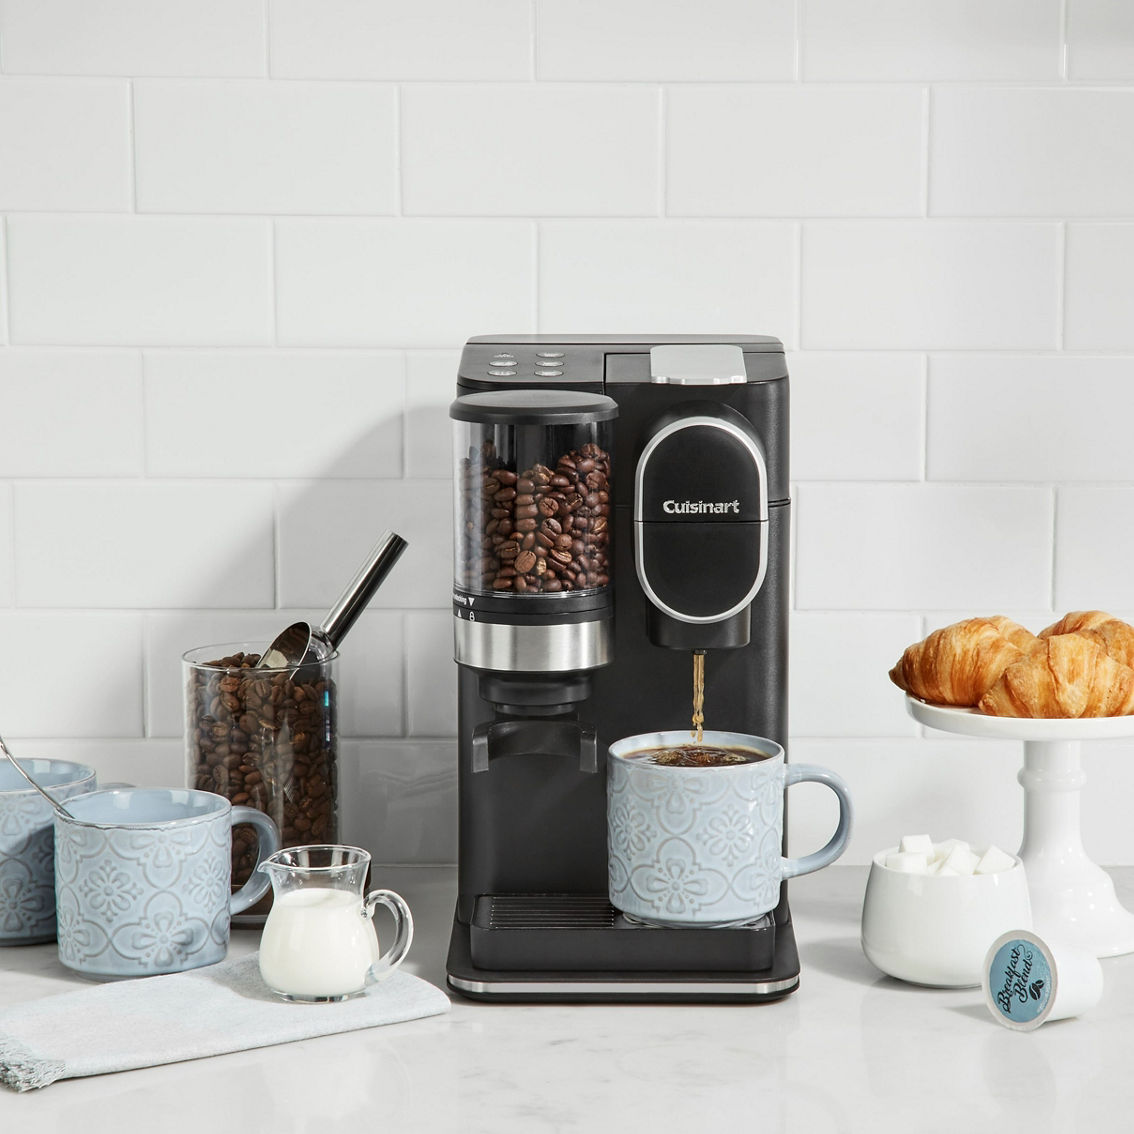 Cuisinart Grind and Brew Single Serve Coffeemaker - Image 5 of 9